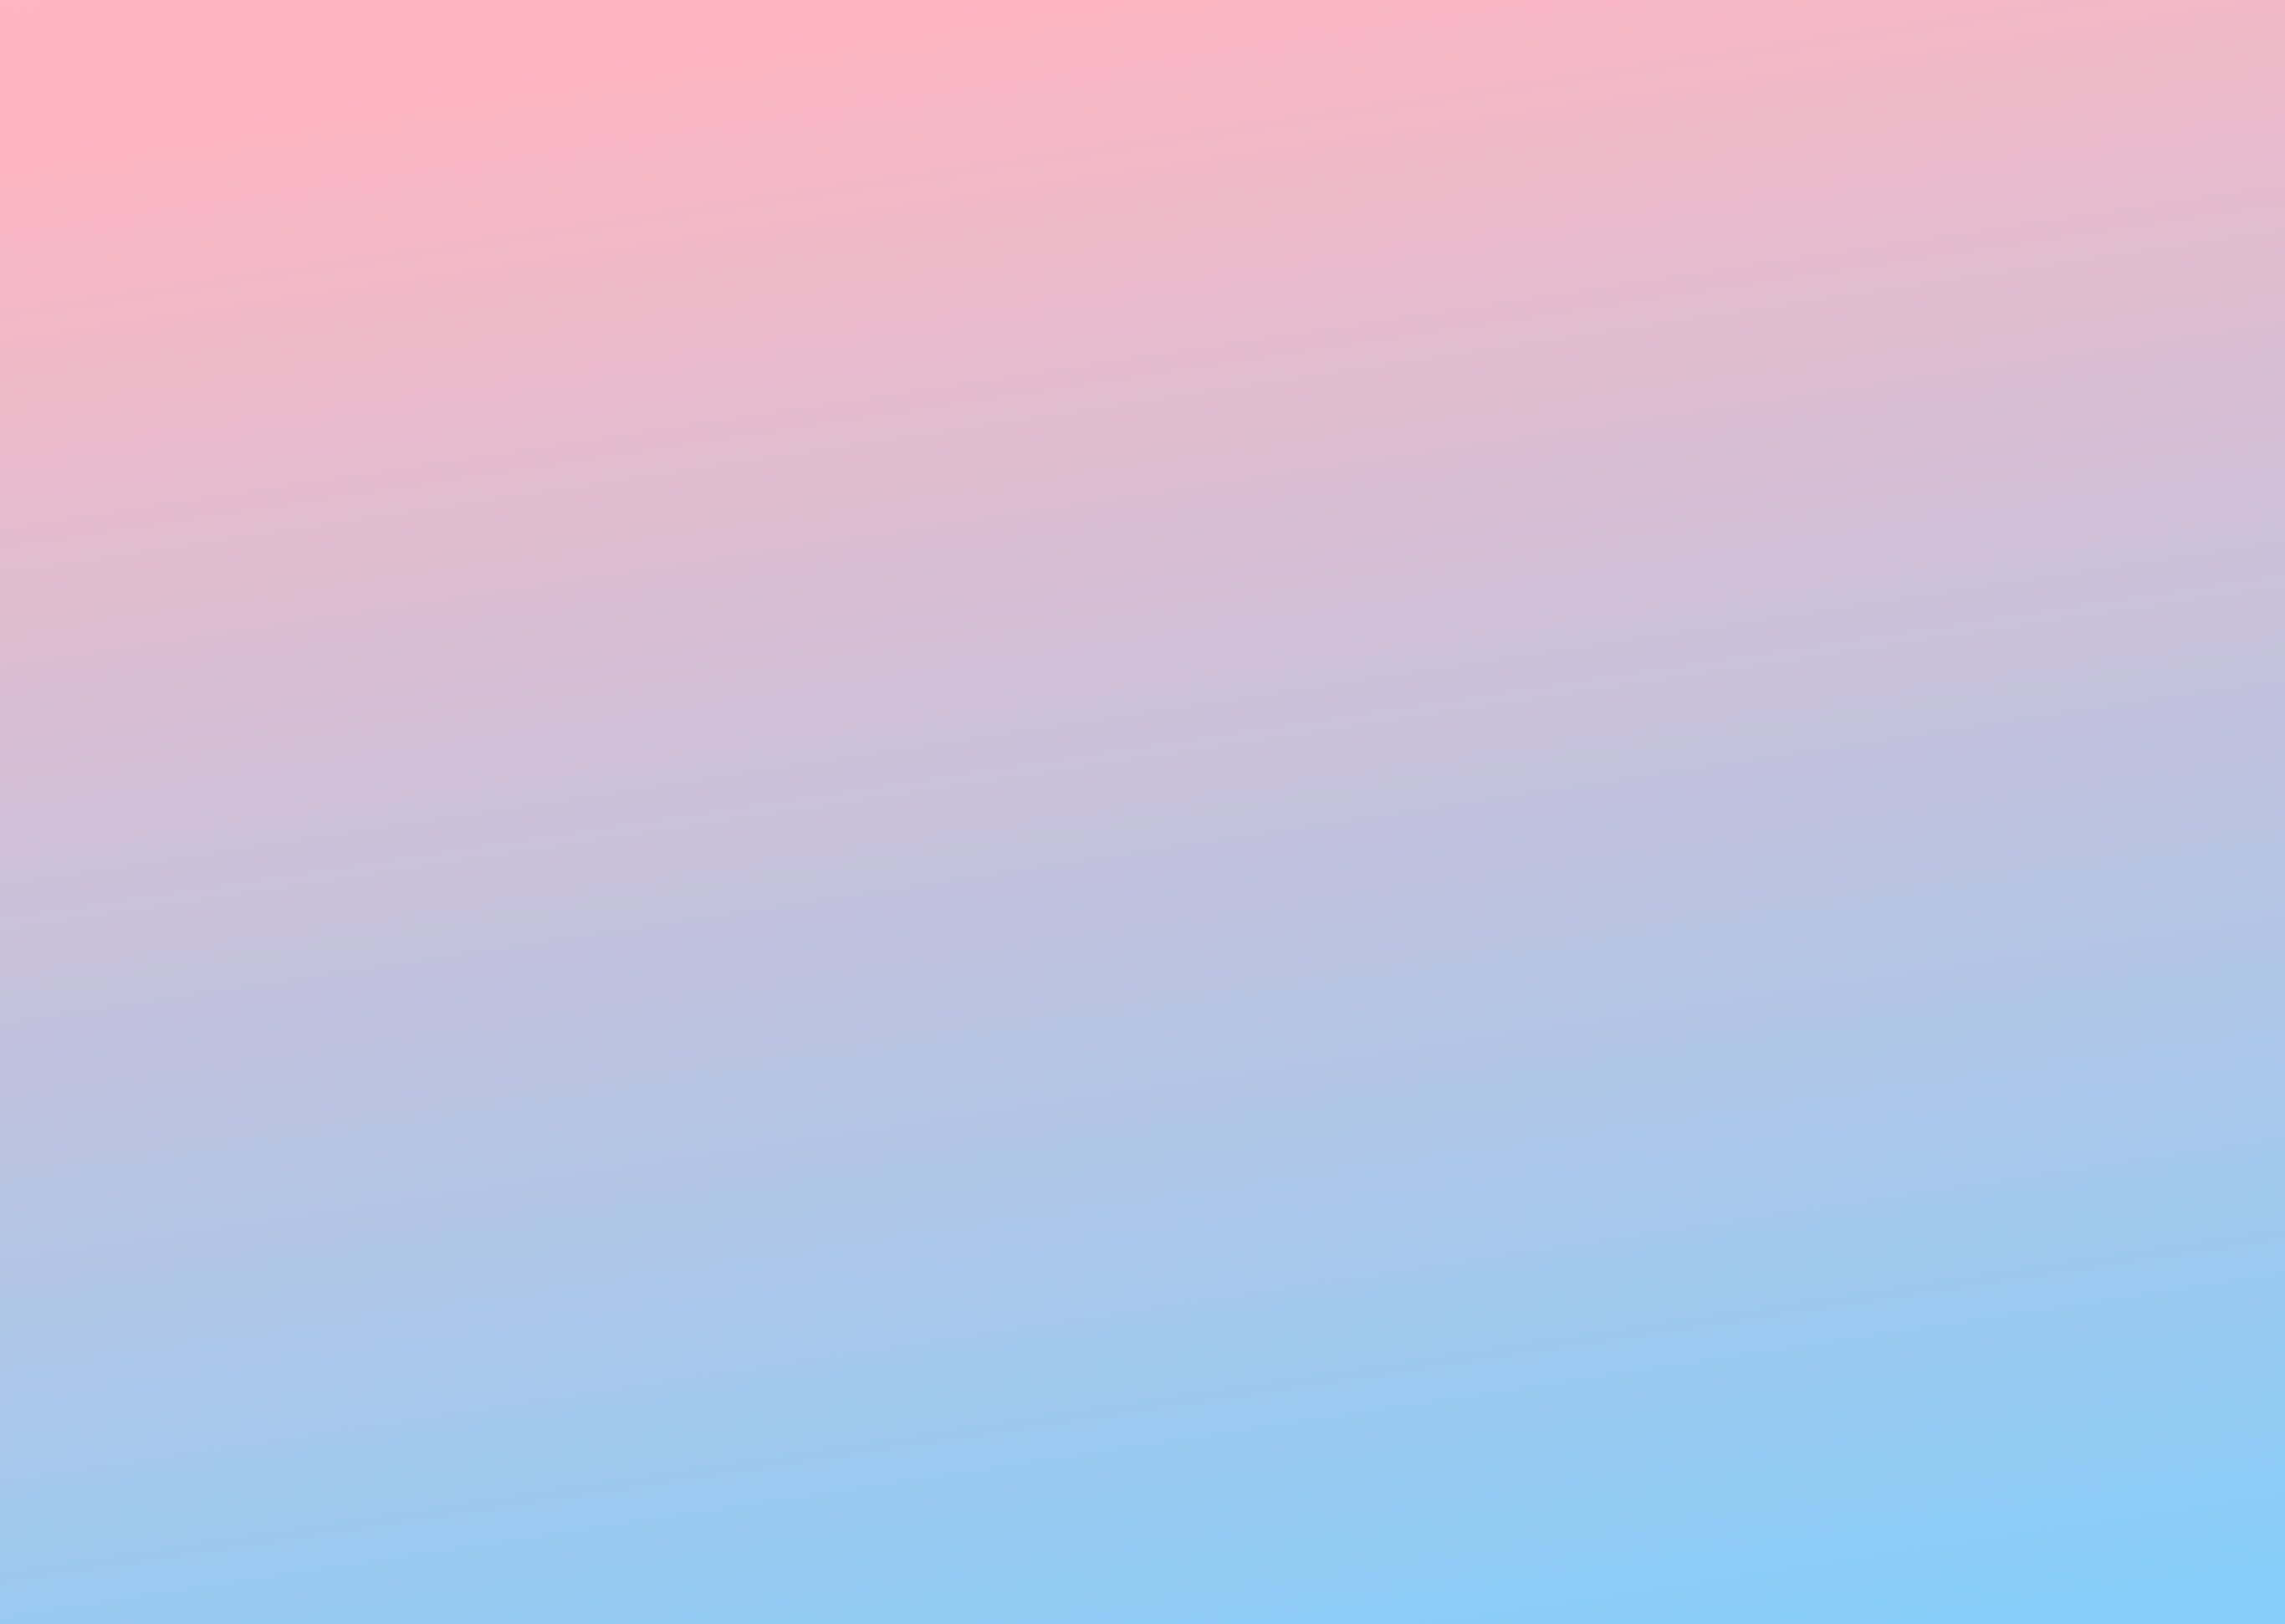 Download Vibrant Pink and Blue Gradient Background